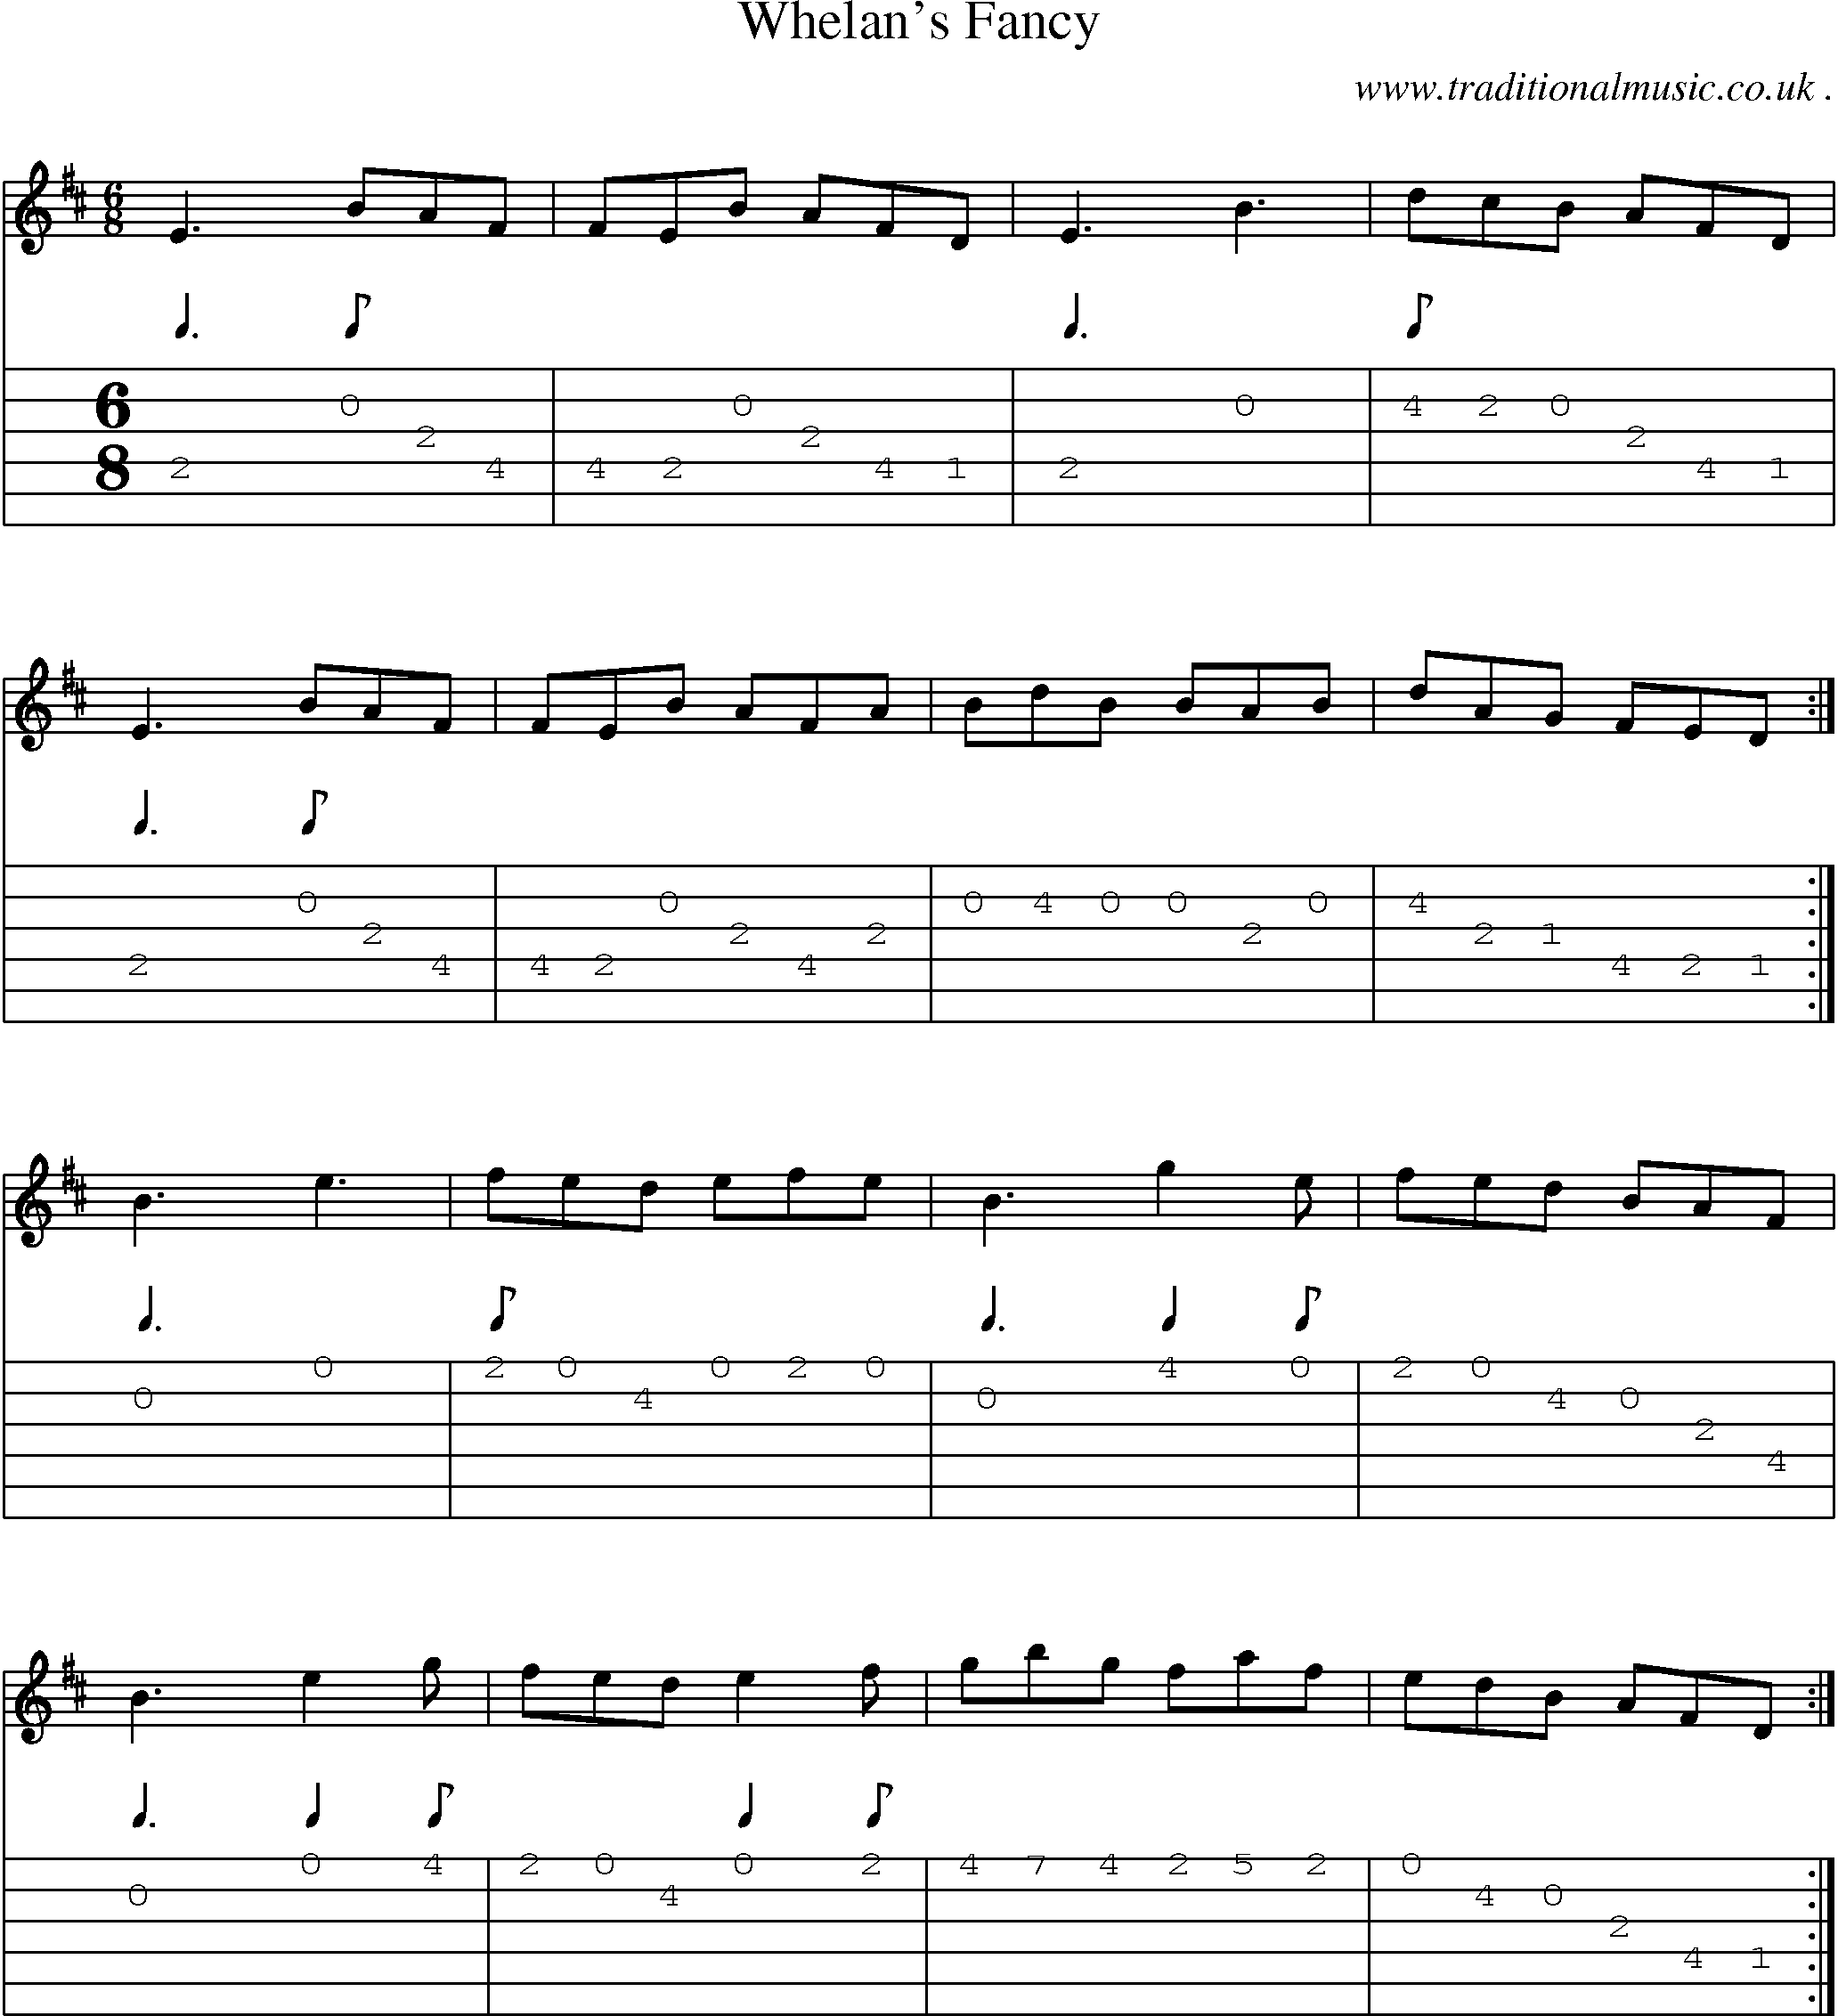 Sheet-Music and Guitar Tabs for Whelans Fancy